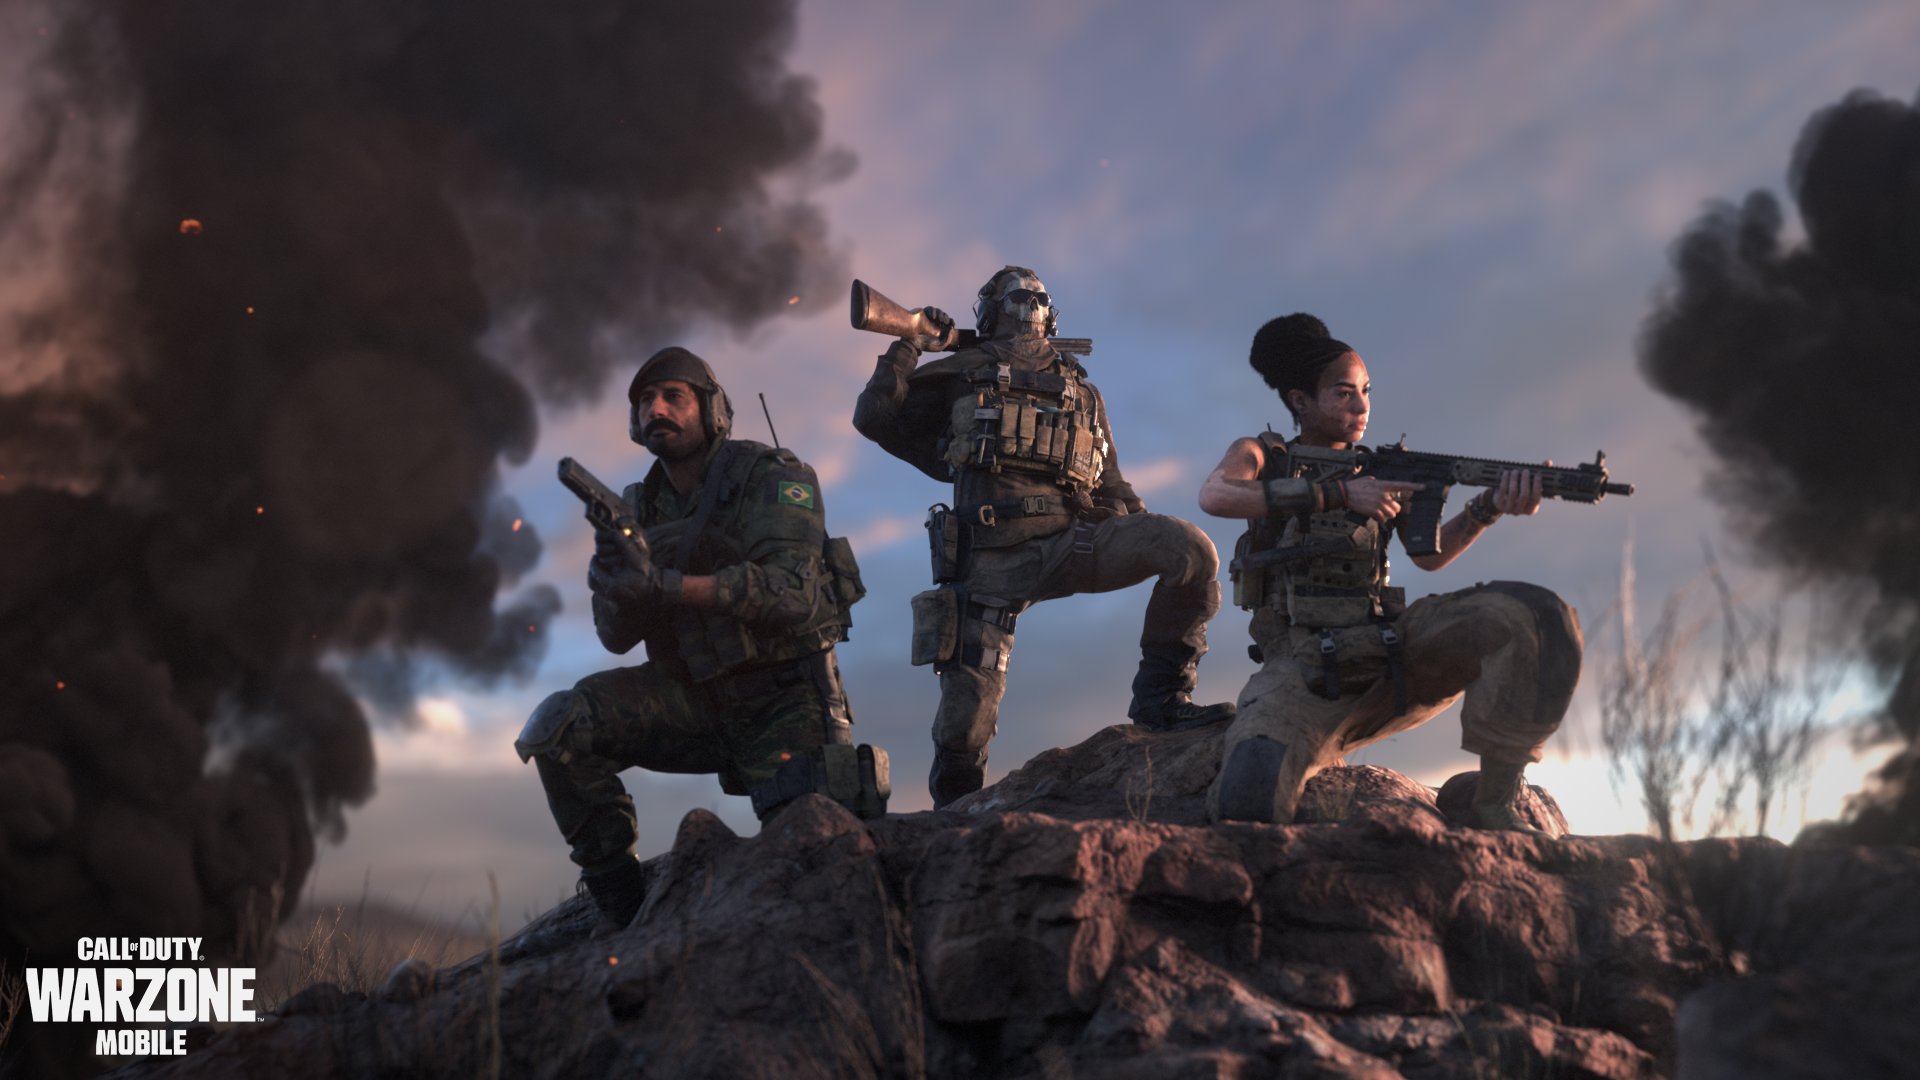 Activision is presenting a third, upcoming offshoot of the franchise with Warzone Mobile, which will take us to the battlefields of the Warzone on mobile devices for the first time.